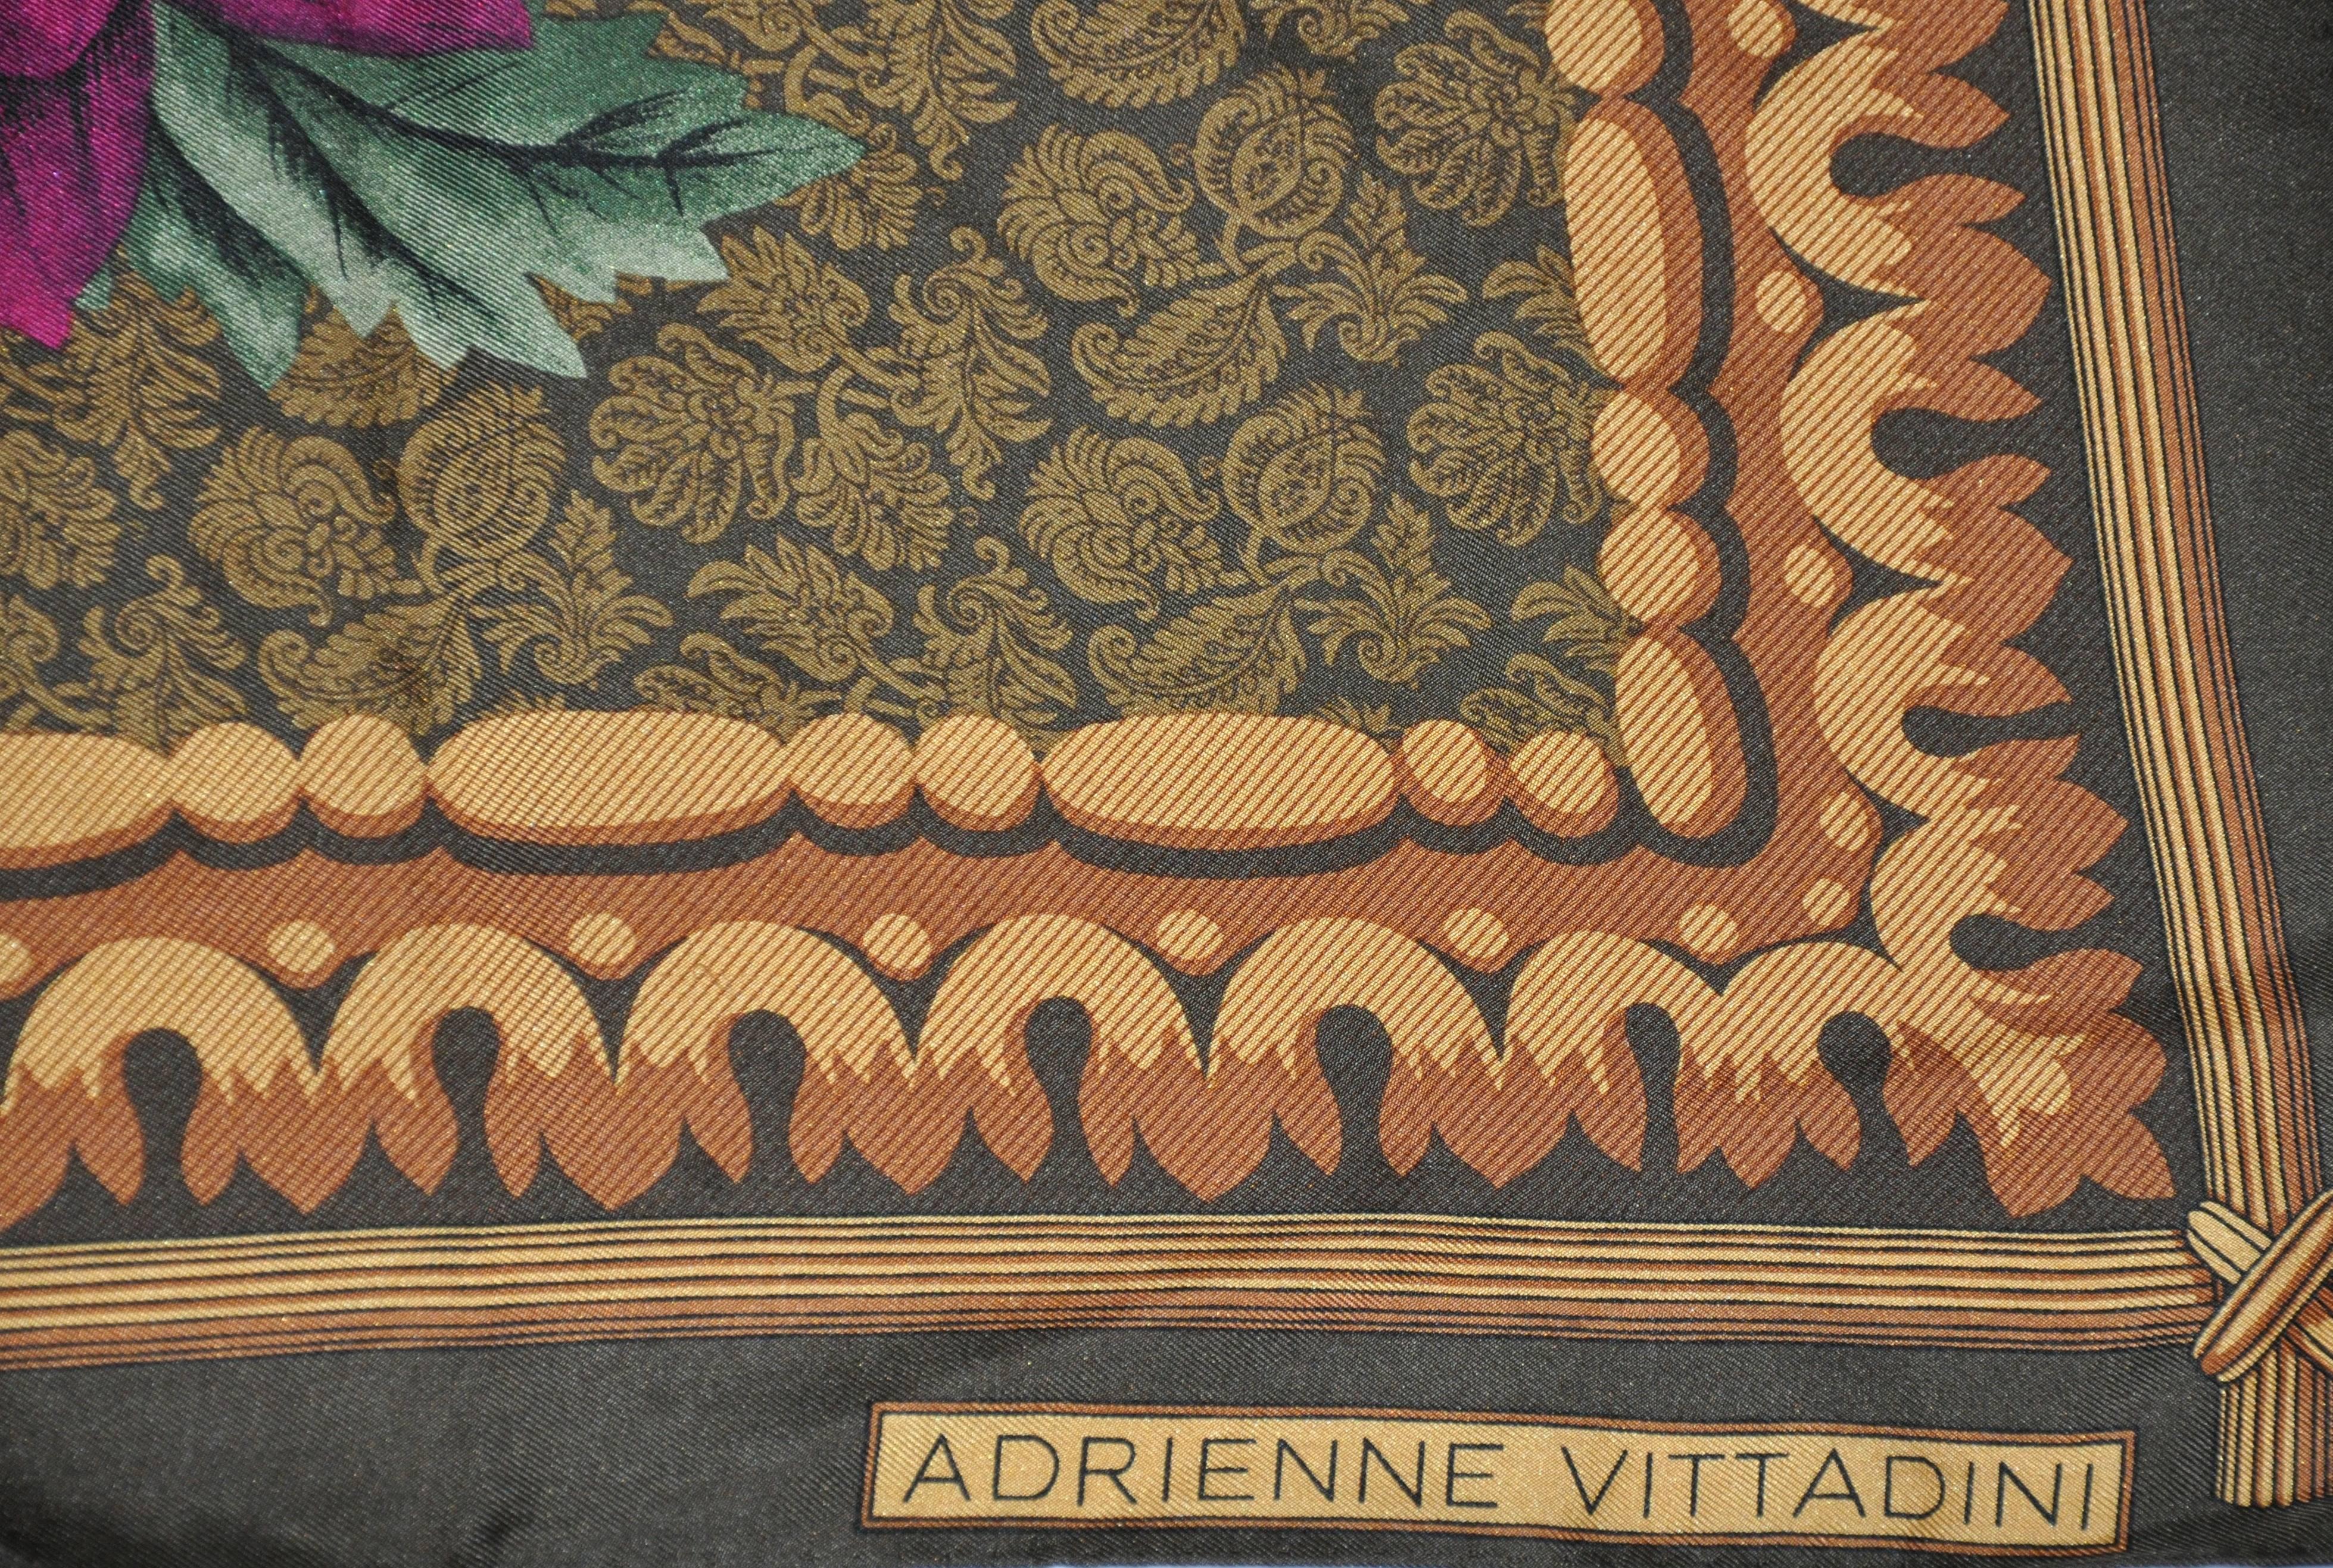 Adrienne Vittadini "Limited Edition" wonderfully warm hues of "Multi-Floral " print silk scarf measures 34" x 34" and finished with hand-rolled edges. Made in Japan.